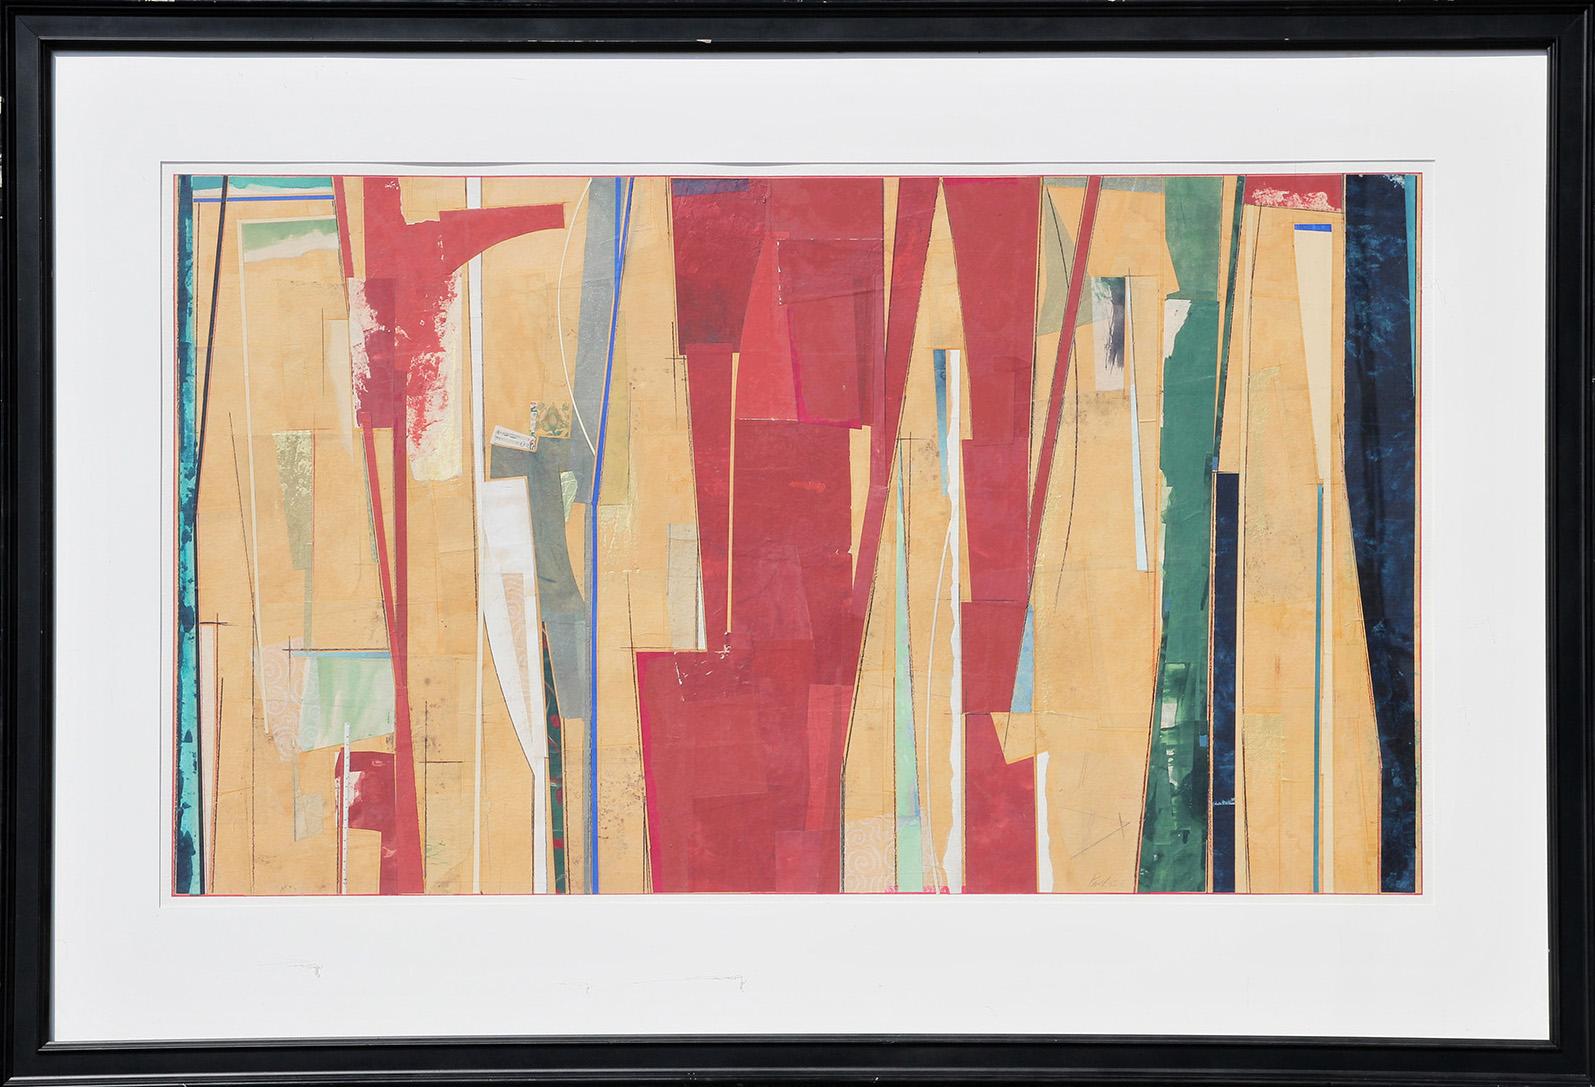 John Pavlicek Abstract Painting - Large Modern Abstract Geometric Red, Yellow & Green Mixed Media Collage Painting